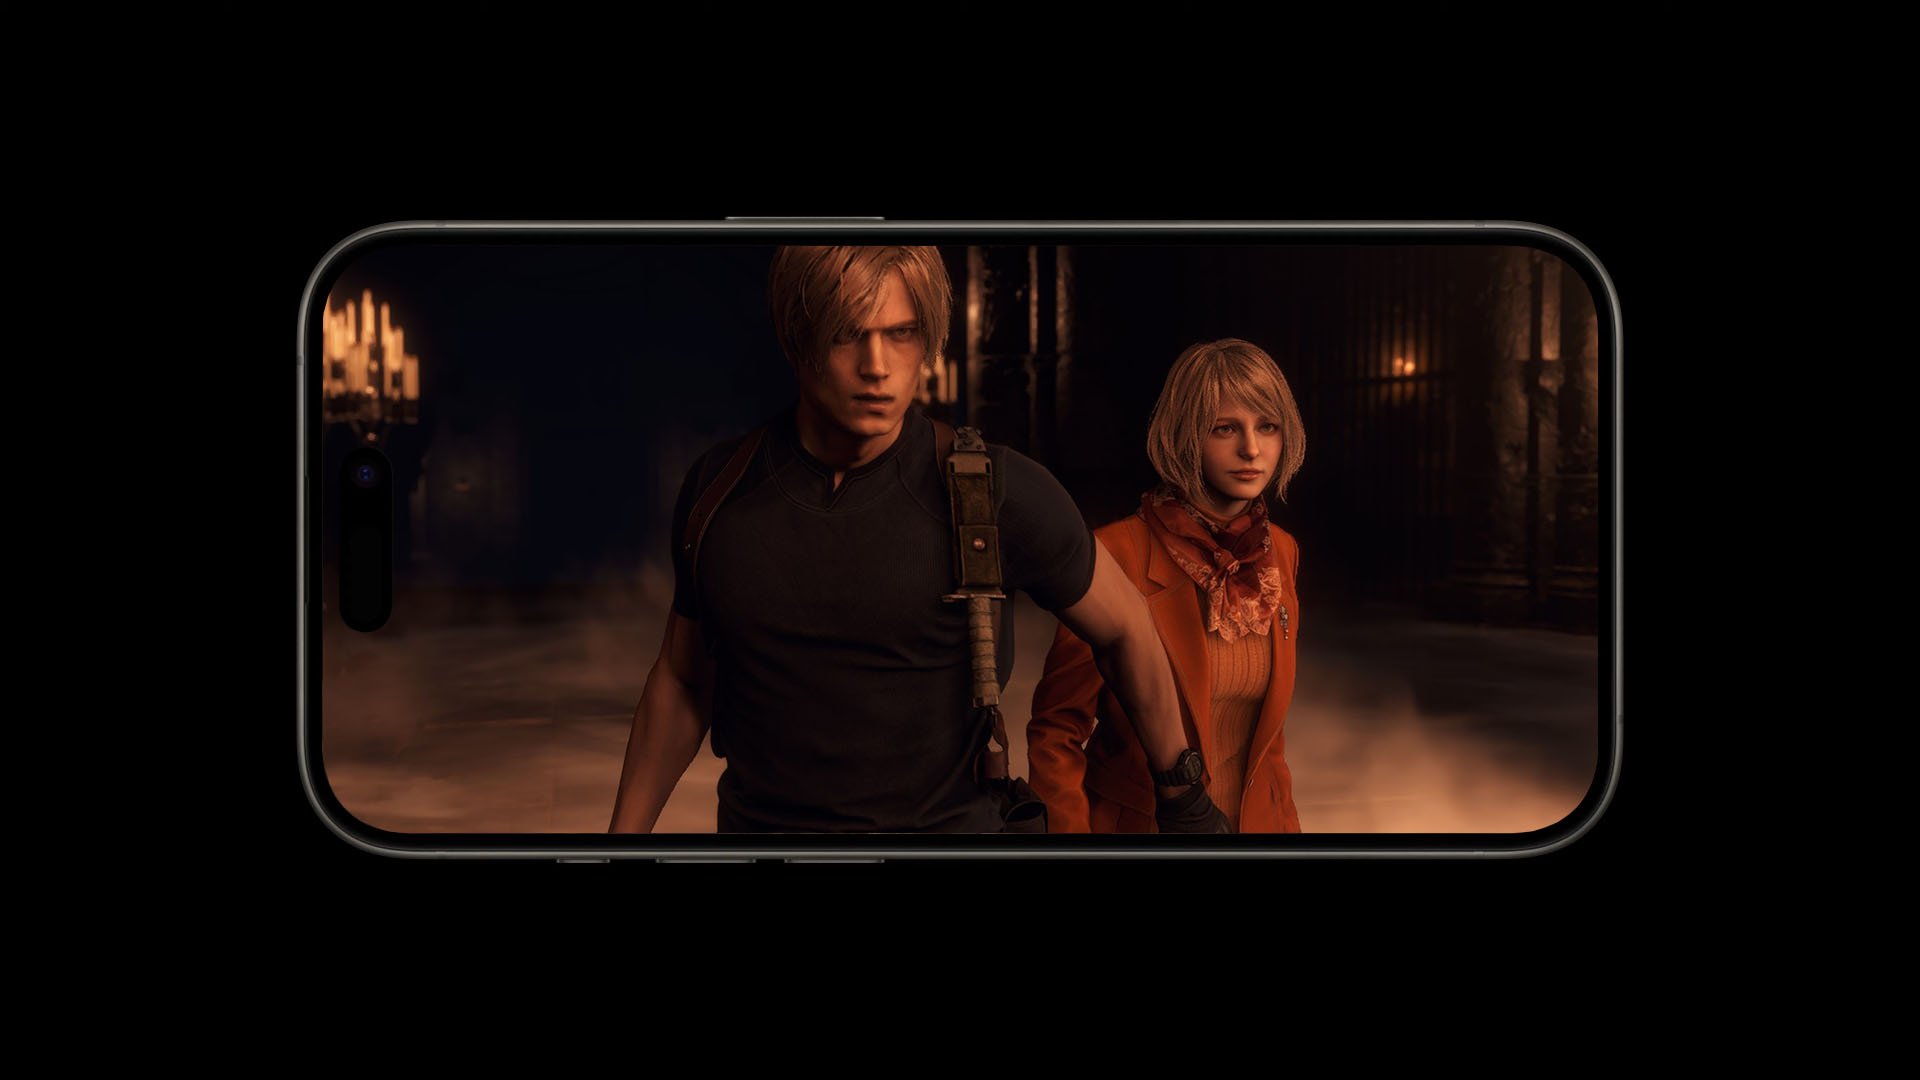 Resident Evil Village and the Resident Evil 4 remake are coming to the  iPhone 15 Pro. Apple's iPhone 15 Pro has an A17 Pro chip that enables  hardware-based ray tracing for games.